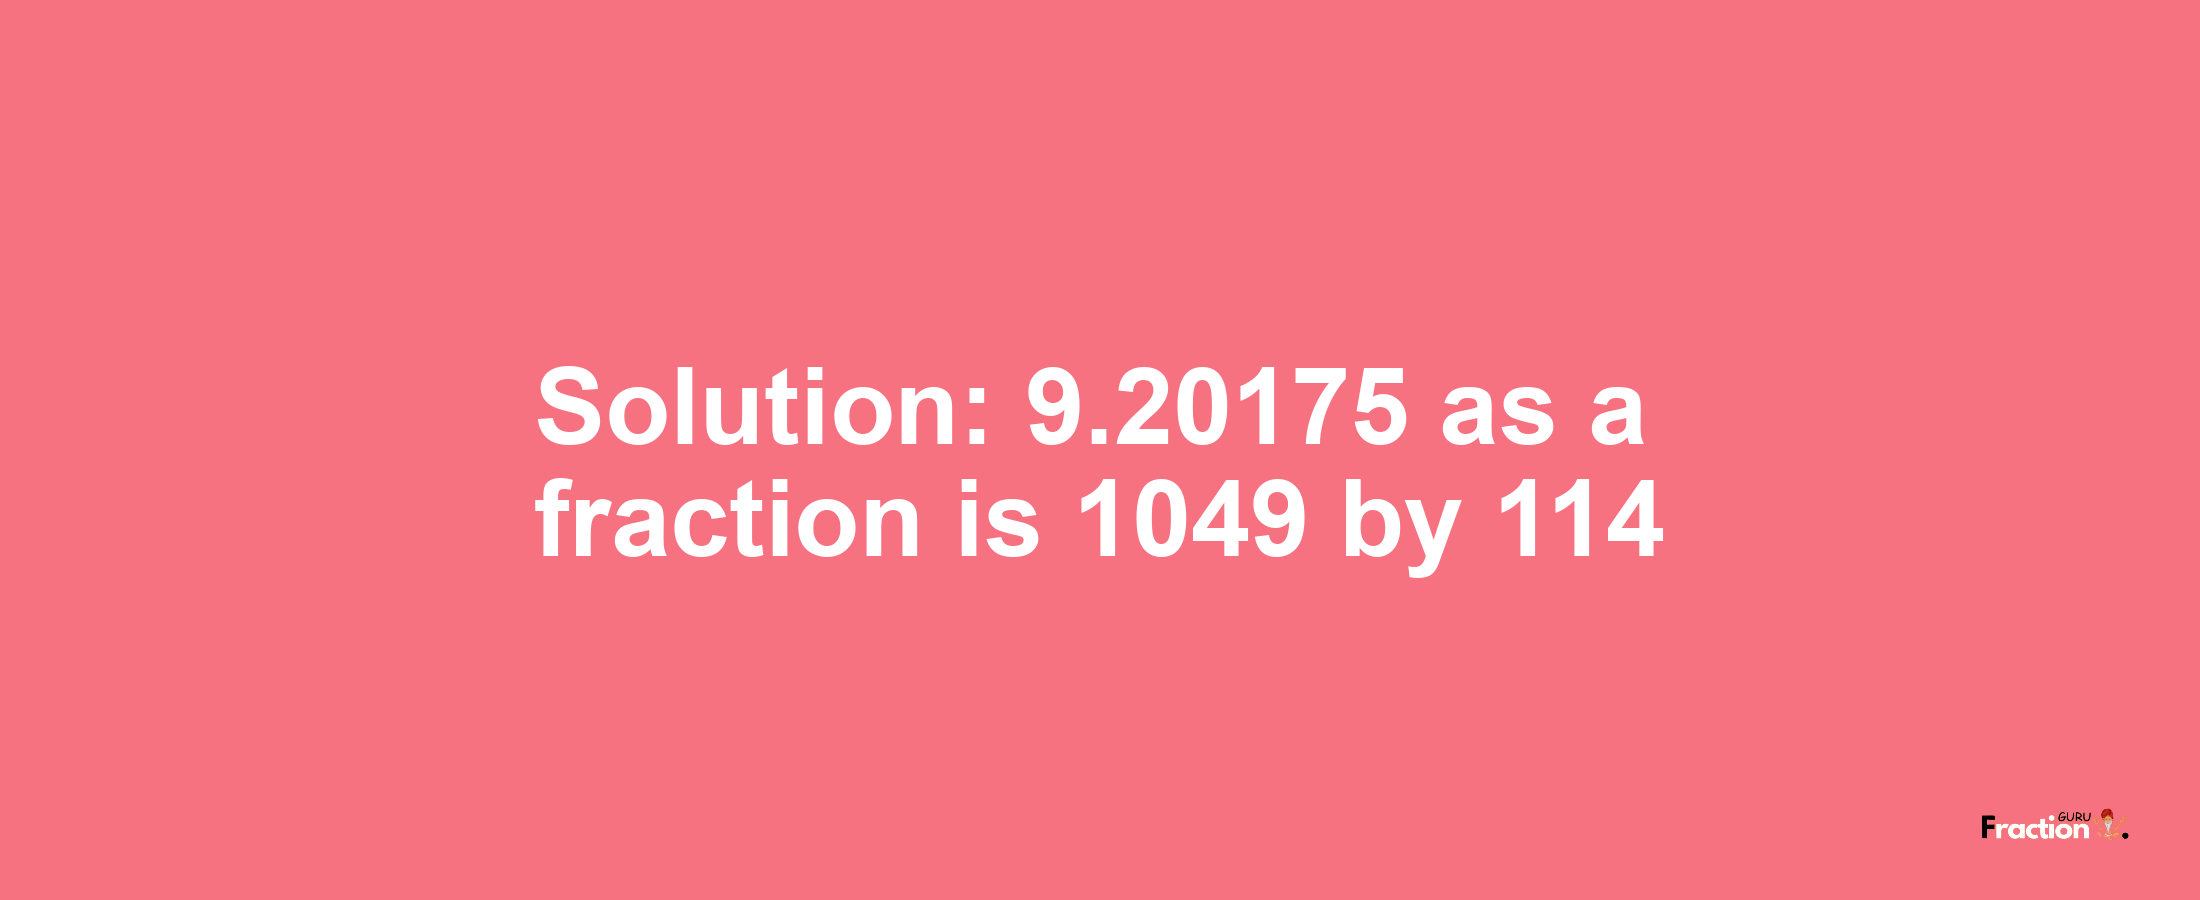 Solution:9.20175 as a fraction is 1049/114